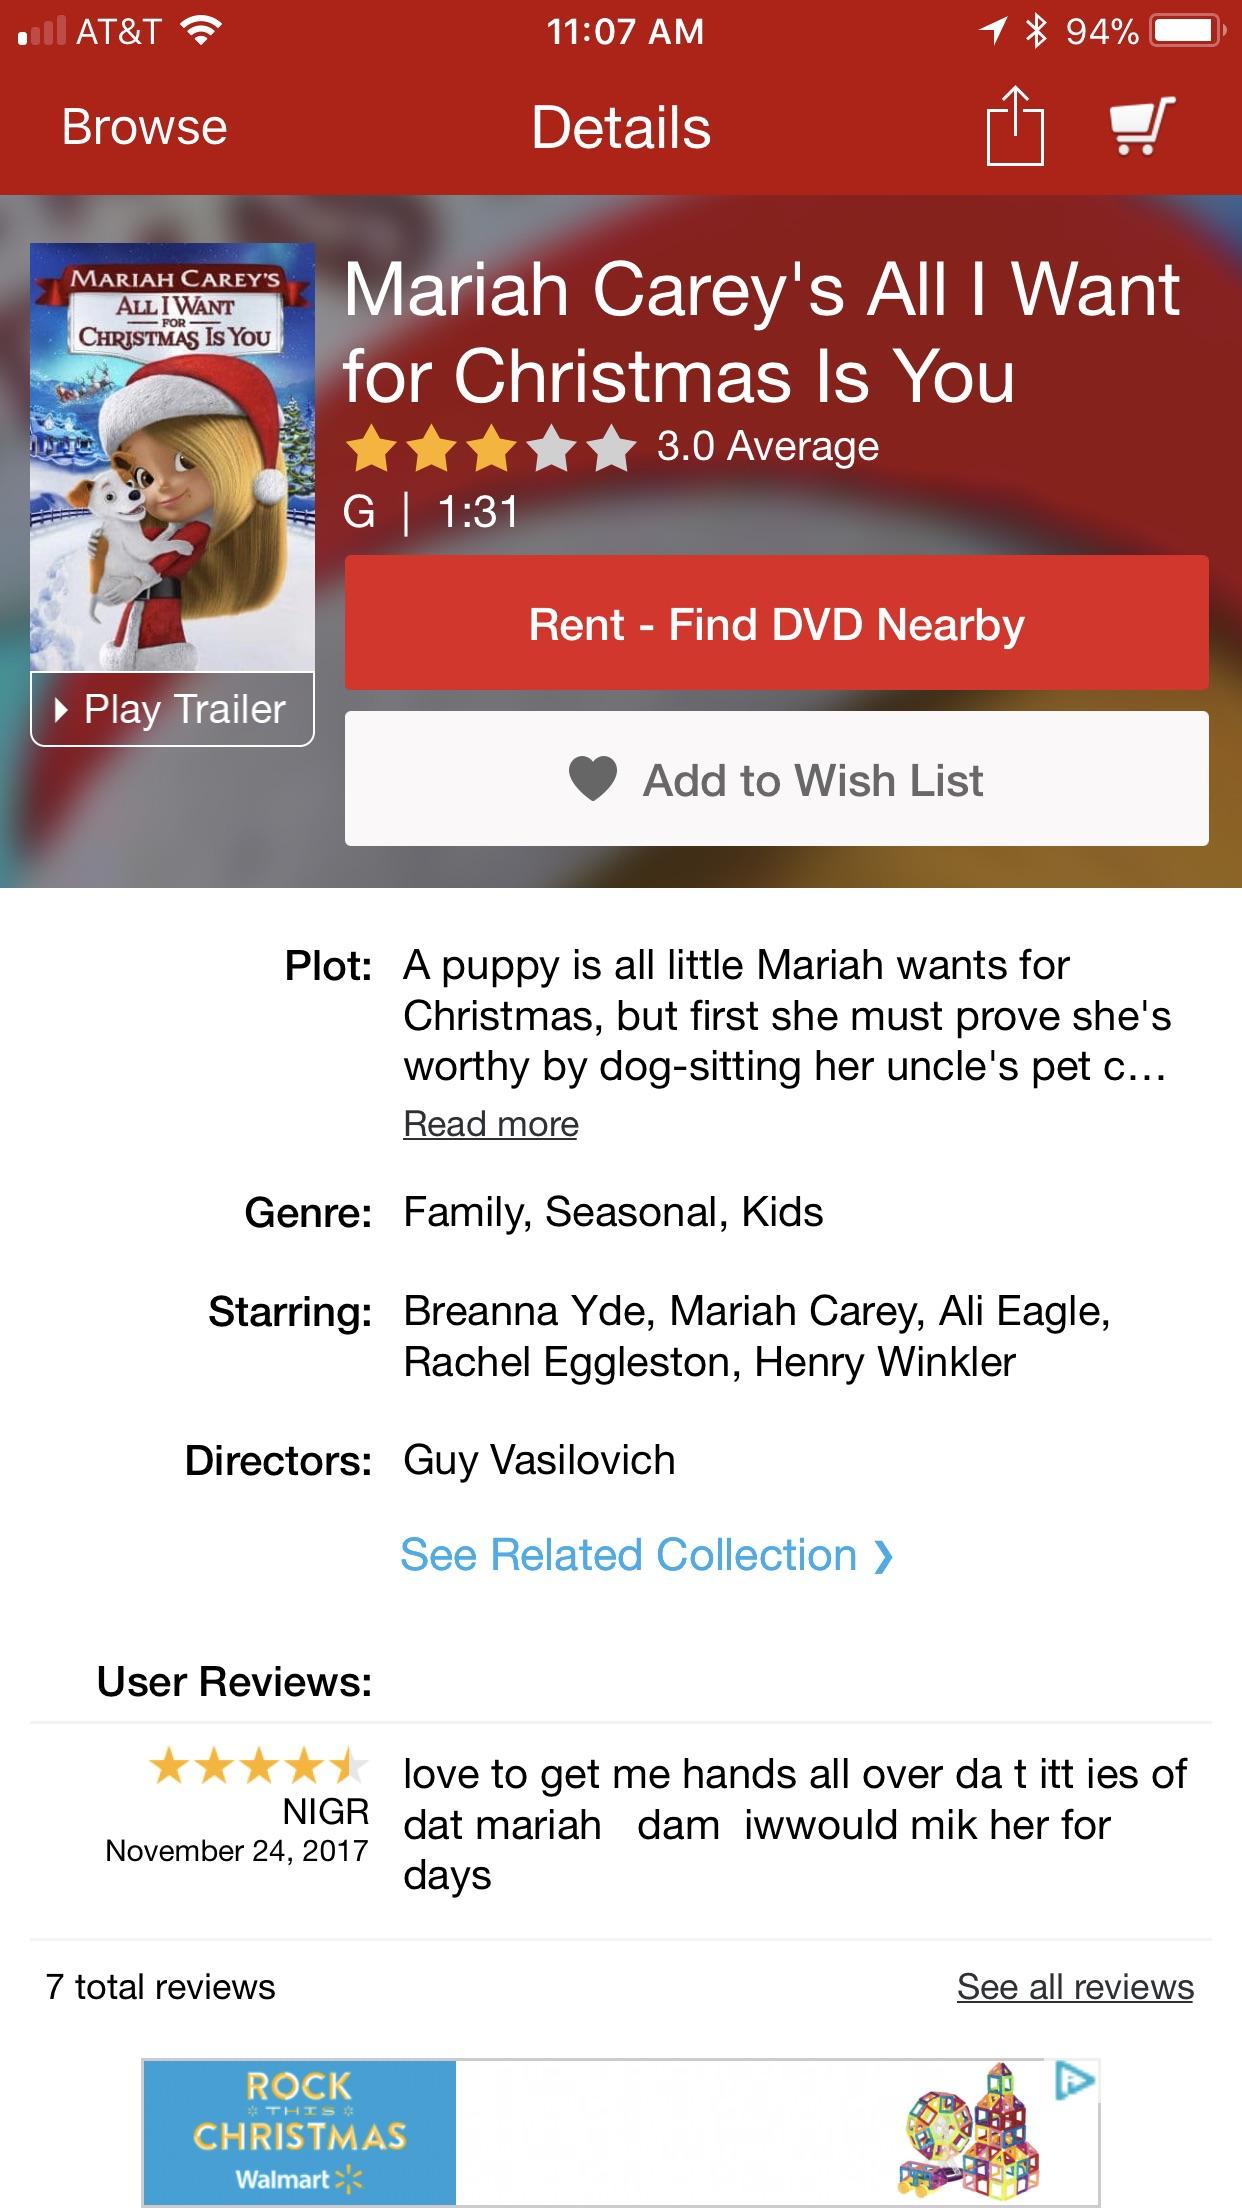 Perfect Review For A Child’s Movie